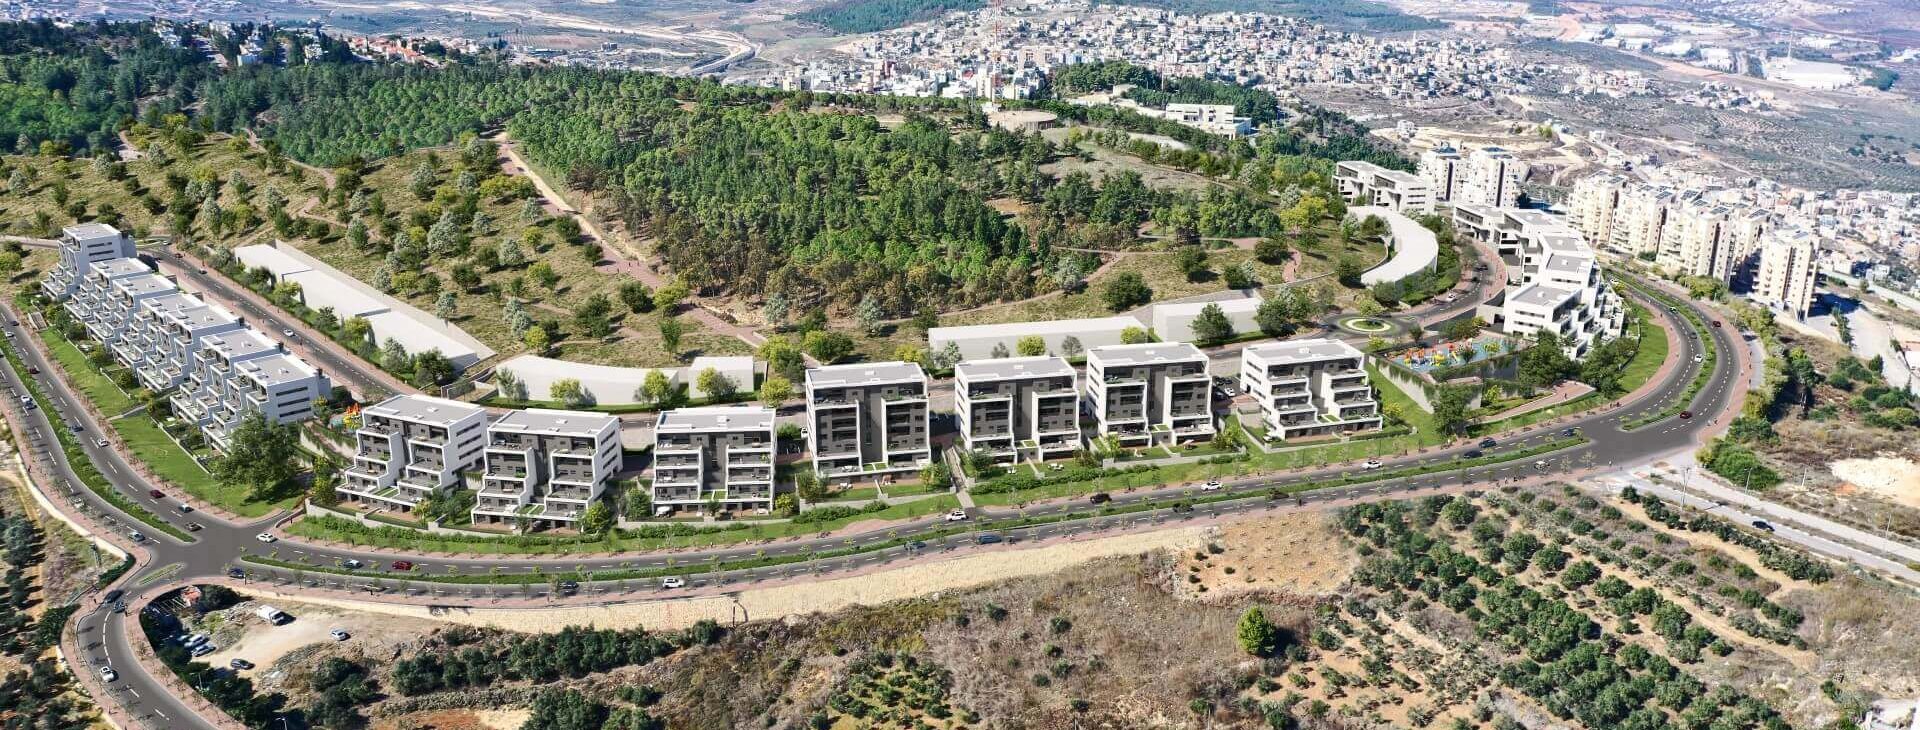 Simulation of buildings in the UNIK HILLS project in Nof HaGalil